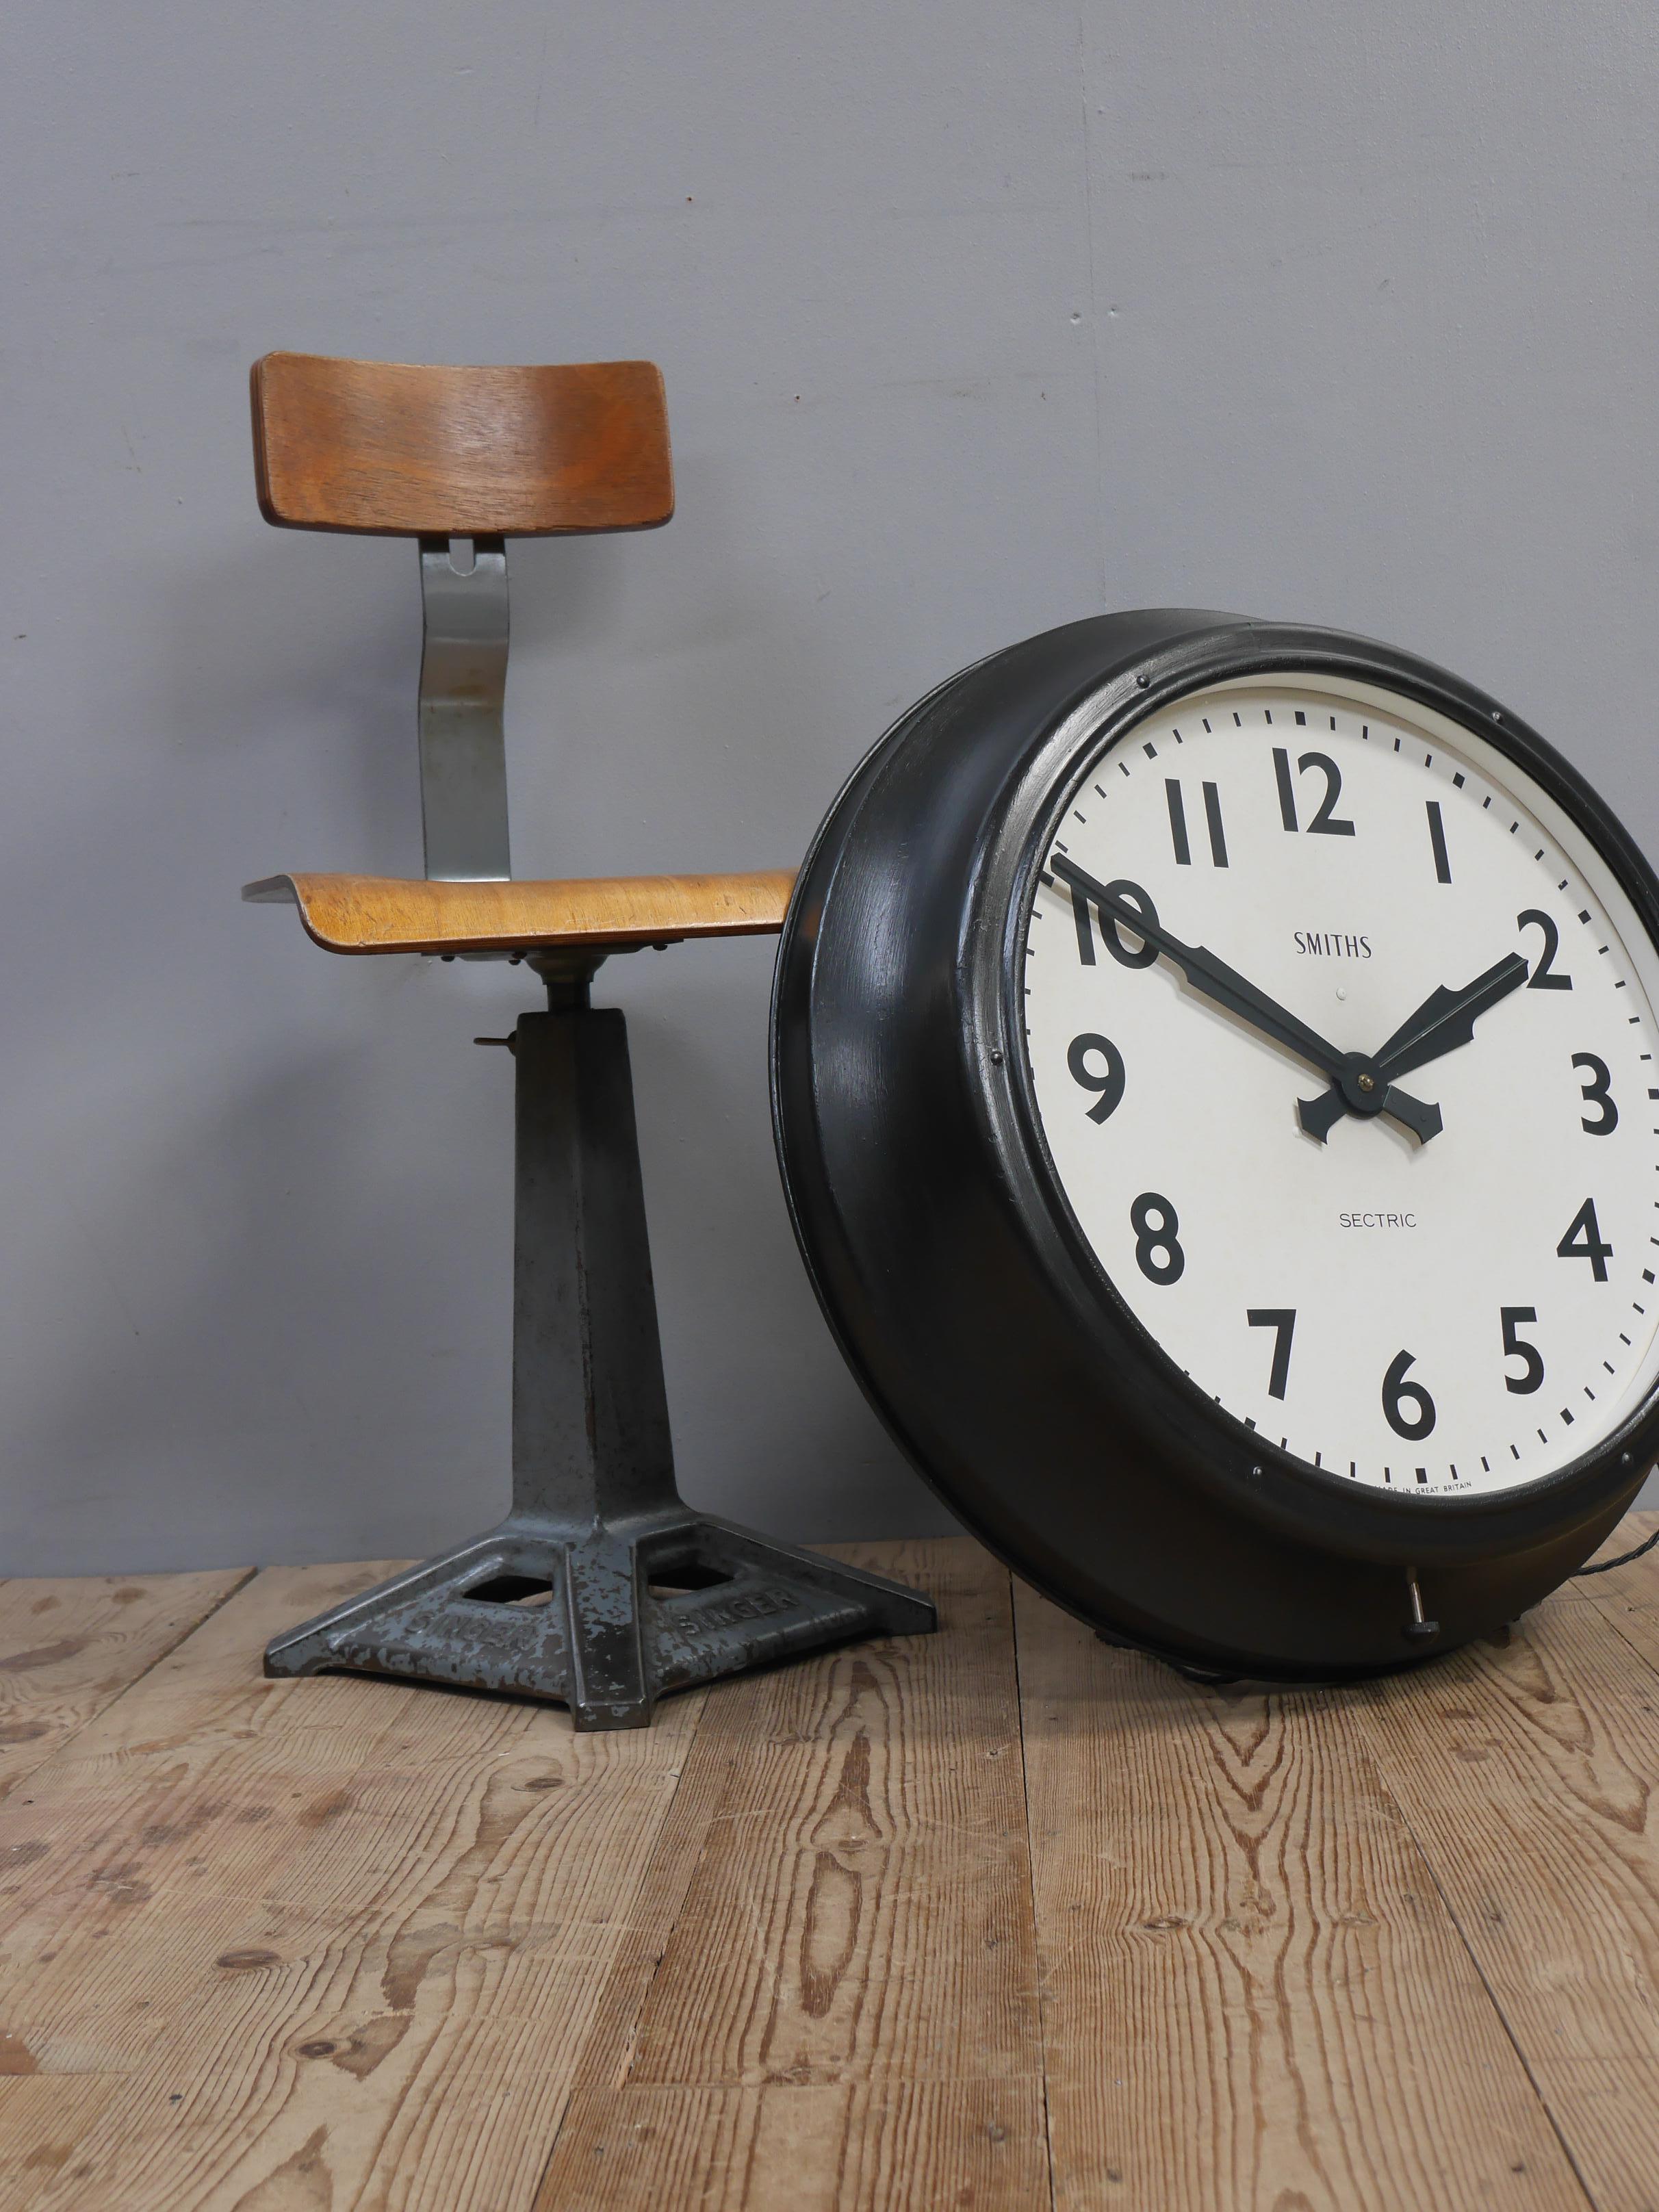 An extra large industrial factory clock by Smiths.
A fantastic & increasingly hard to come by model by this iconic clock maker, Smiths of Great Britain. 
With a crisp clear face retaining it's original, unmistakable hands & Smiths branding and